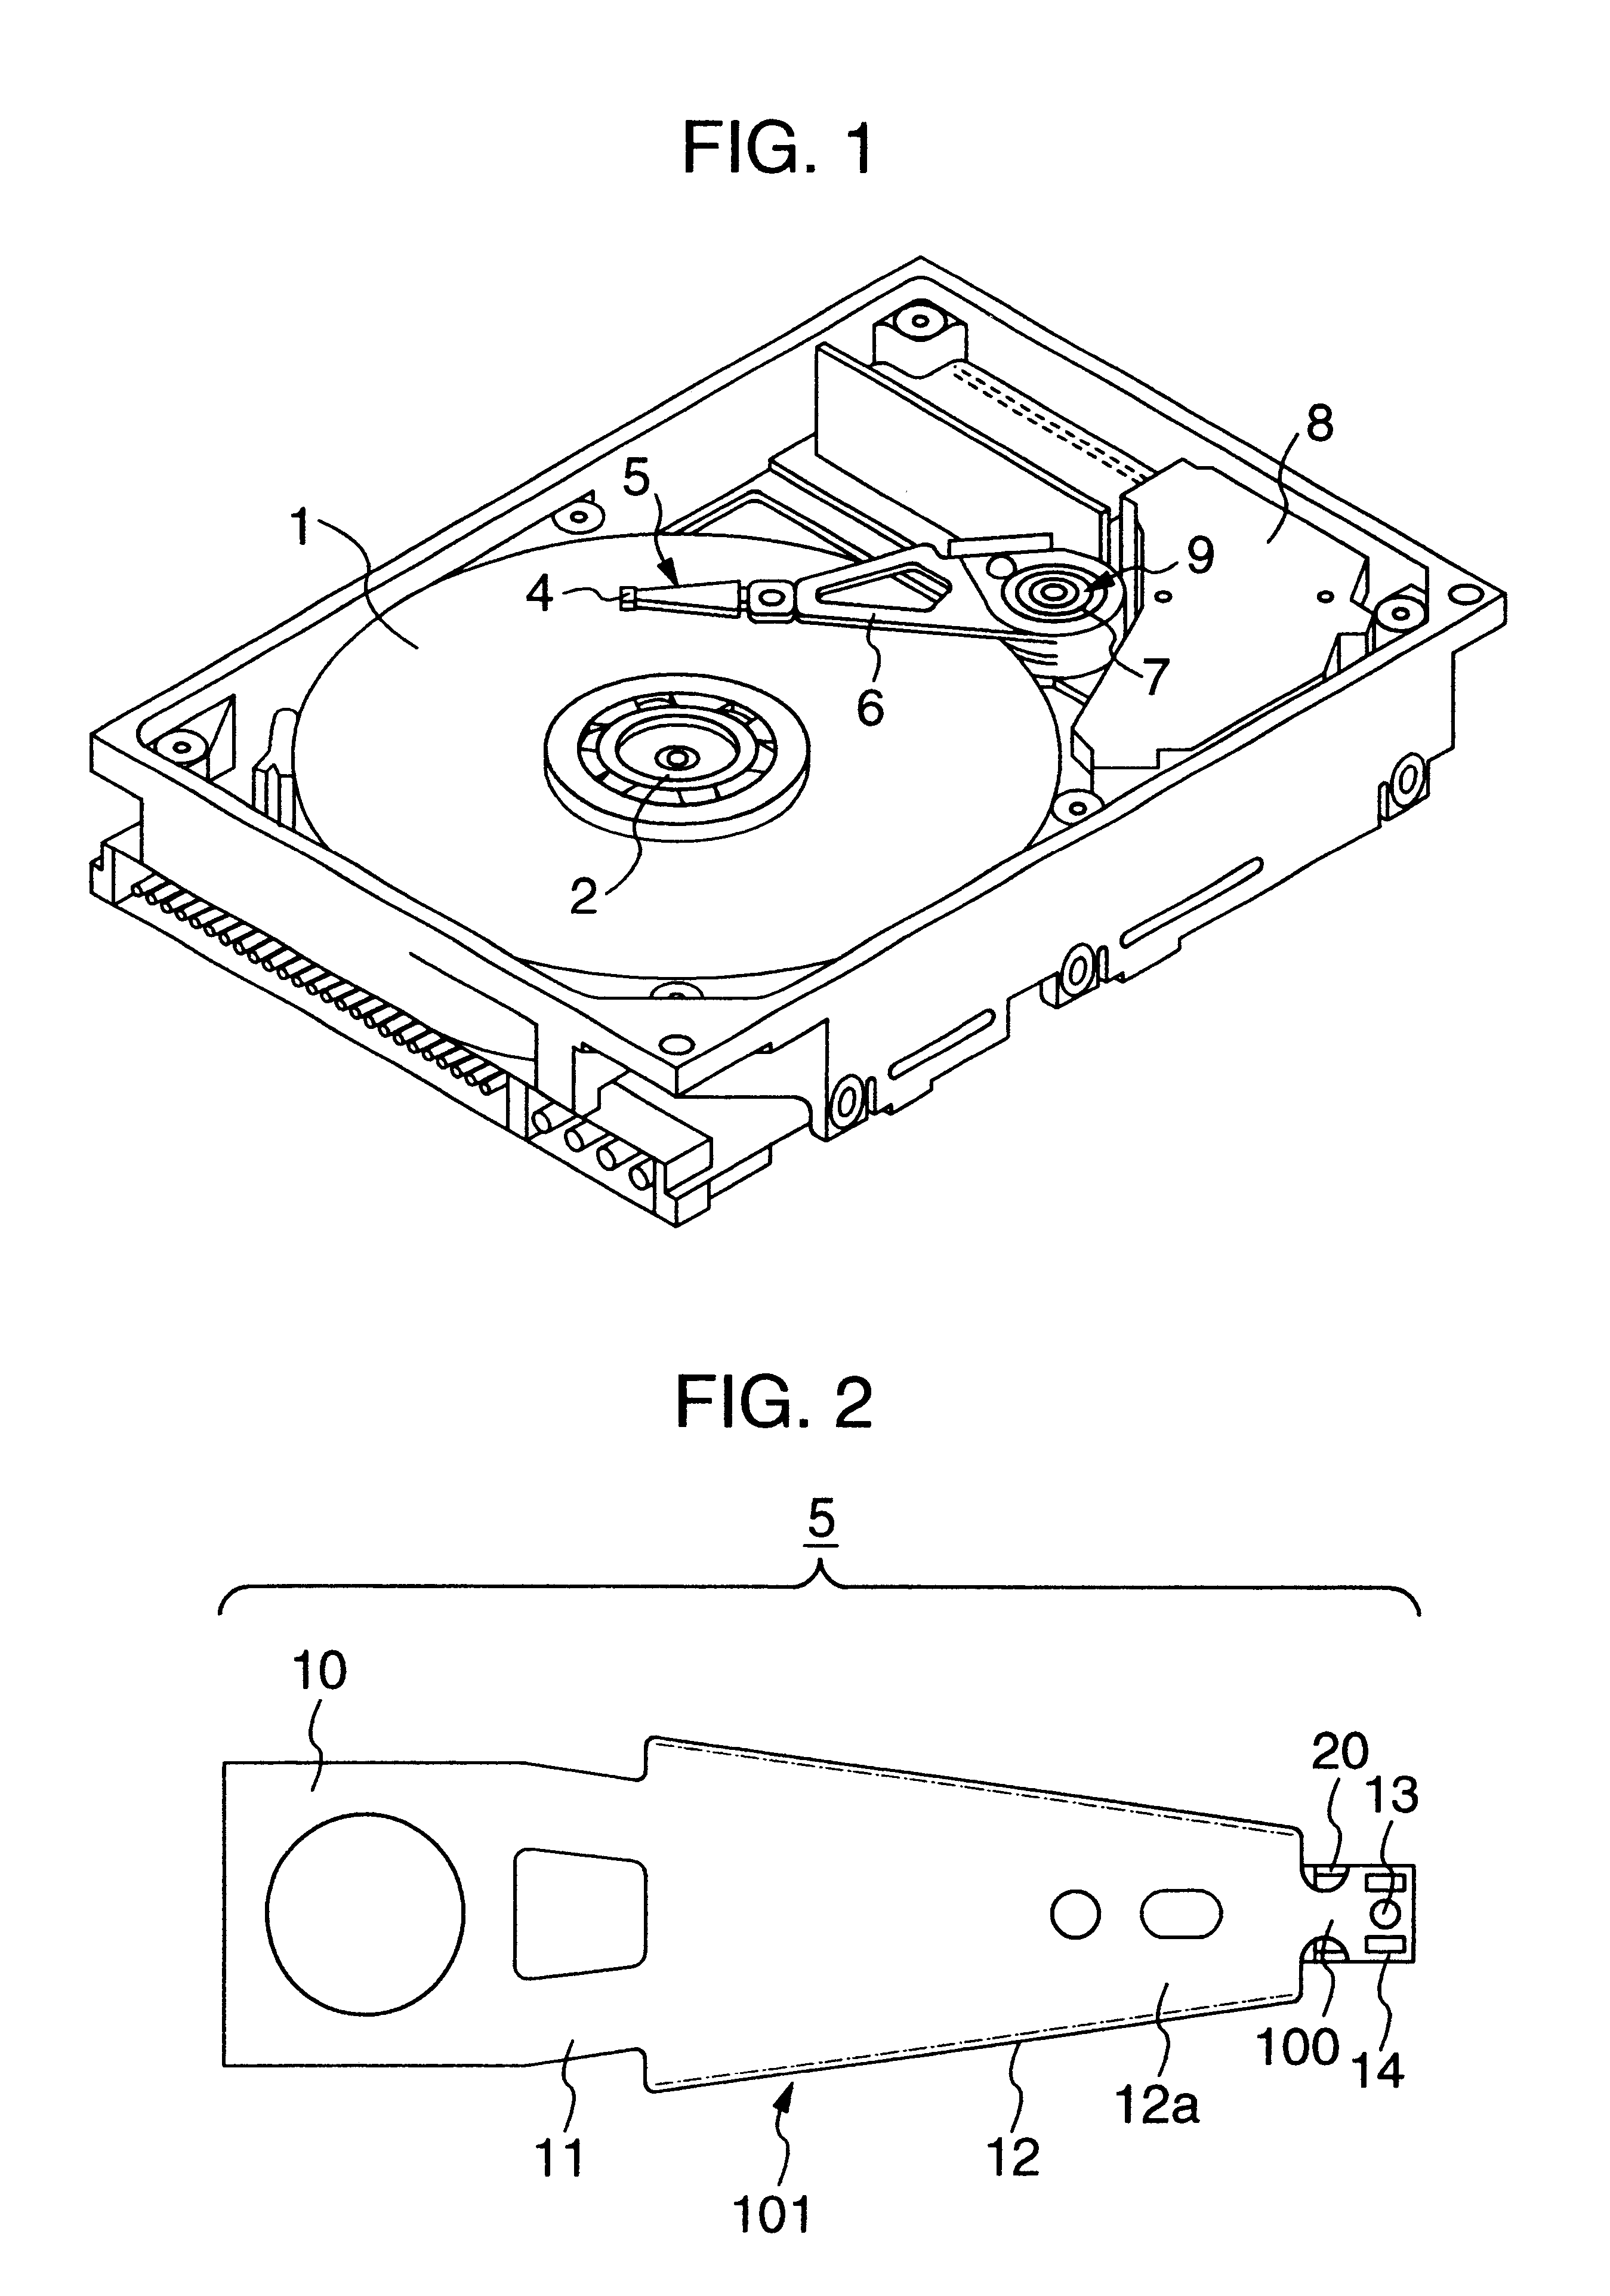 Magnetic-head supporting mechanism